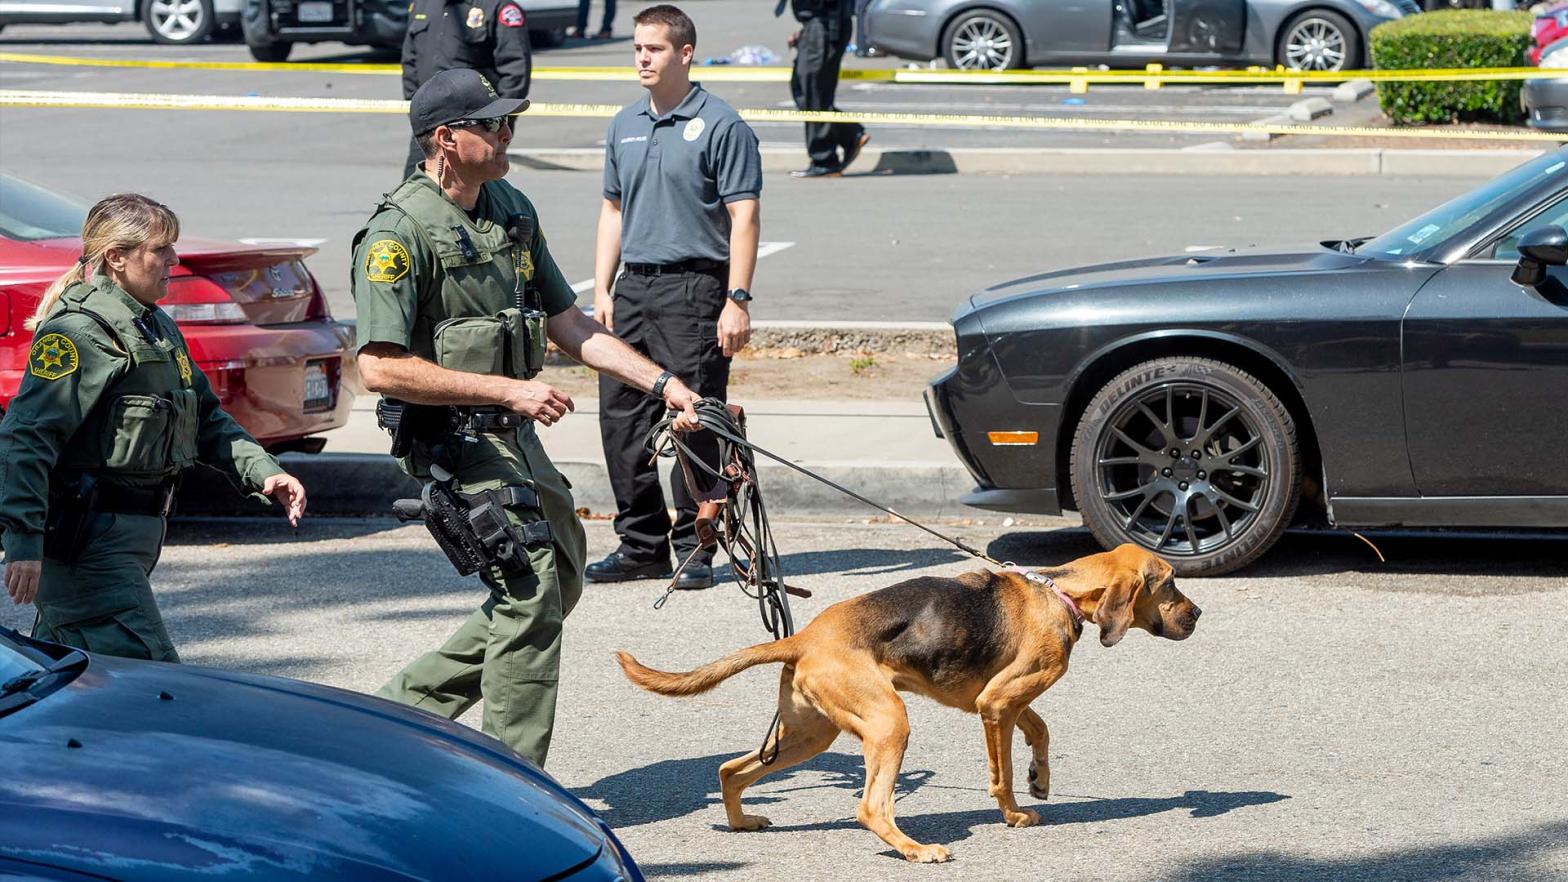 CSUF and local police during an unrelated 2019 incident.  (Photo: MediaNews Group / Orange County Register, Getty Images)